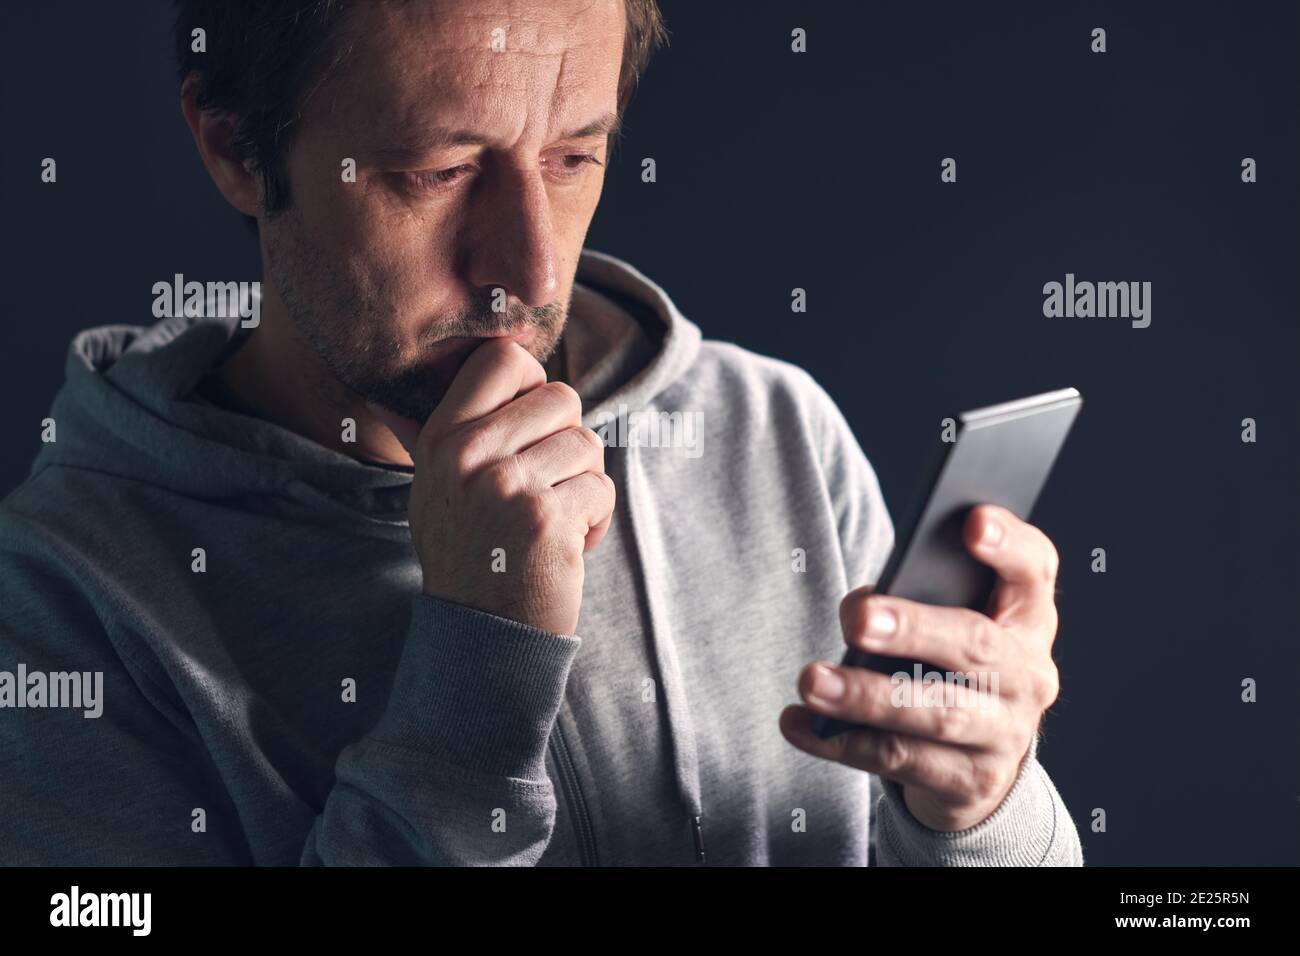 Worried casual mid-adult man looking at the screen of his smartphone with one hand on the chin Stock Photo